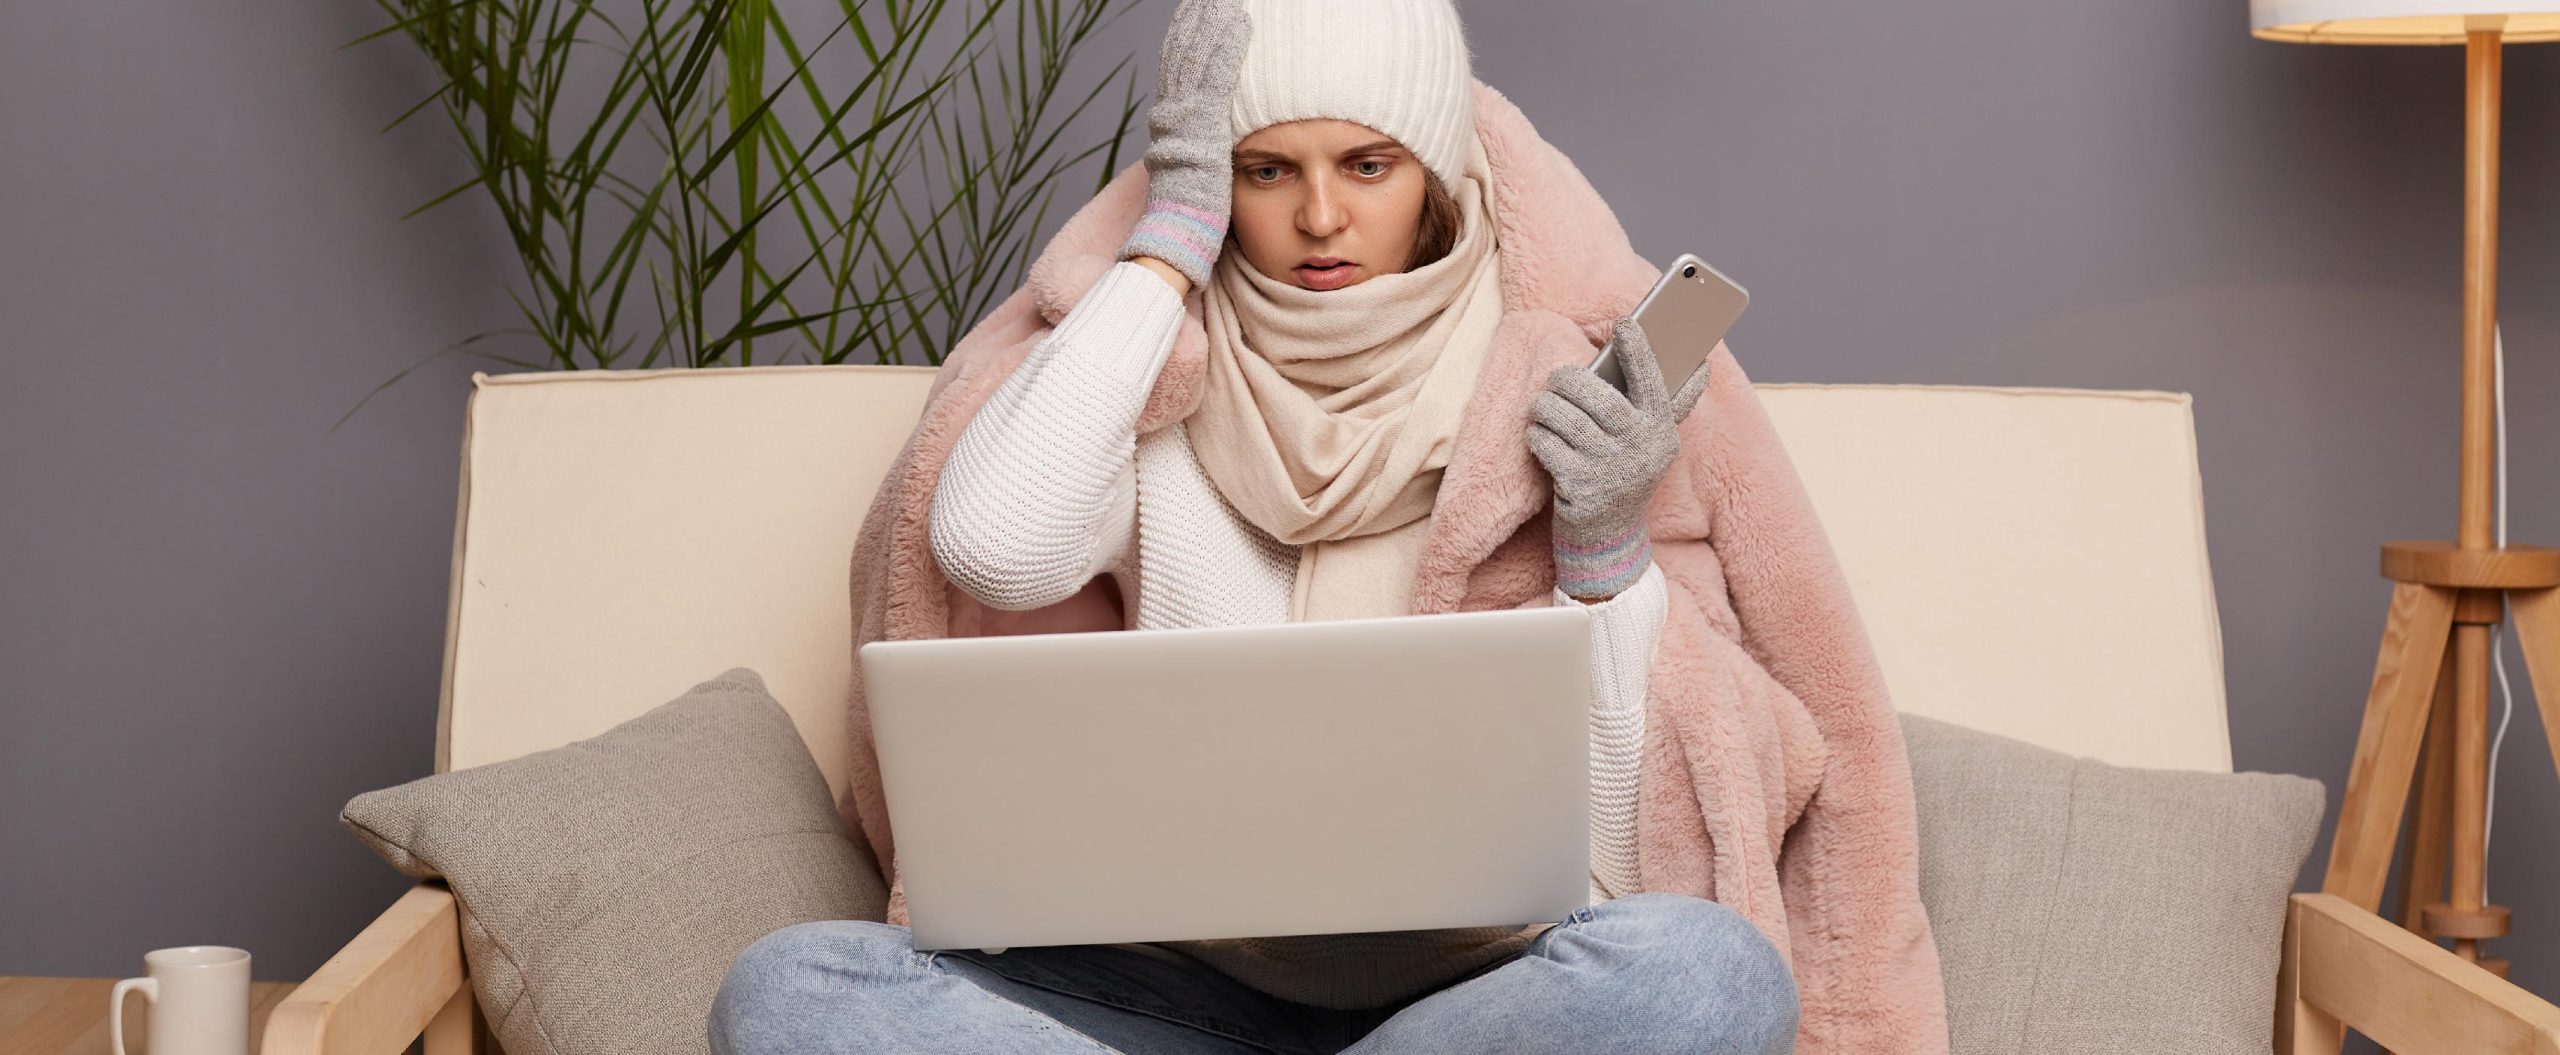 woman with hat and blanket on with laptop on lap